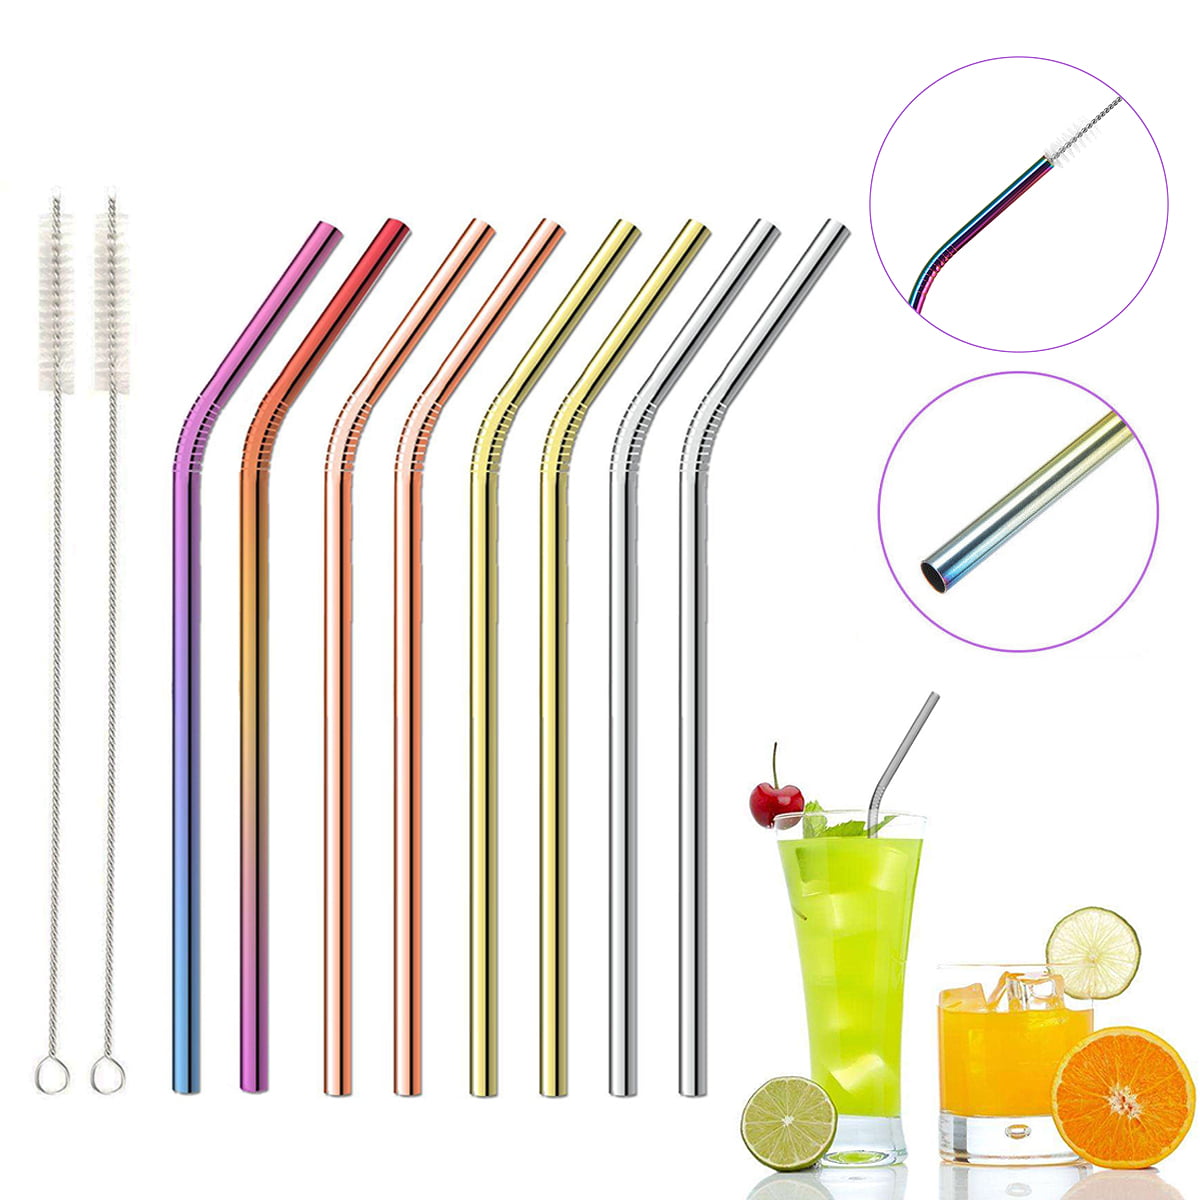 8X Rainbow Color Stainless Steel Drinking Straws Reusable Filter With 2 Brush!